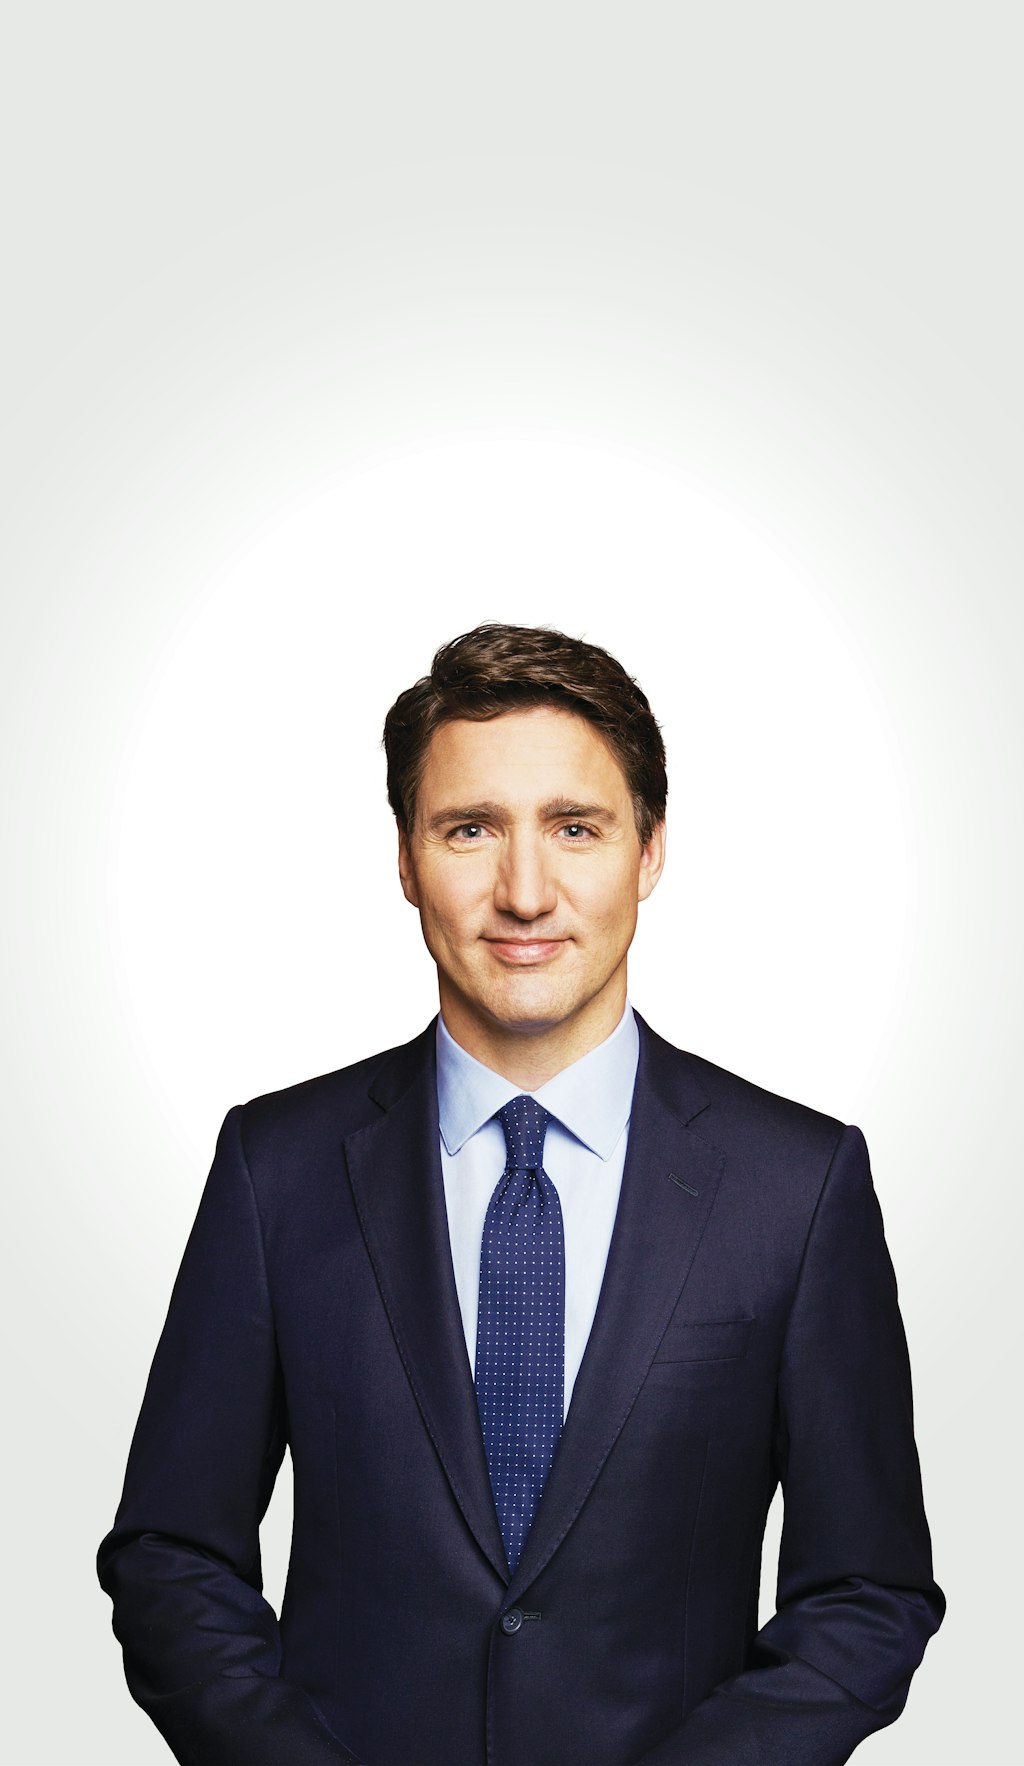 Prime Minister, Justin Trudeau, issues public statement on Ridván